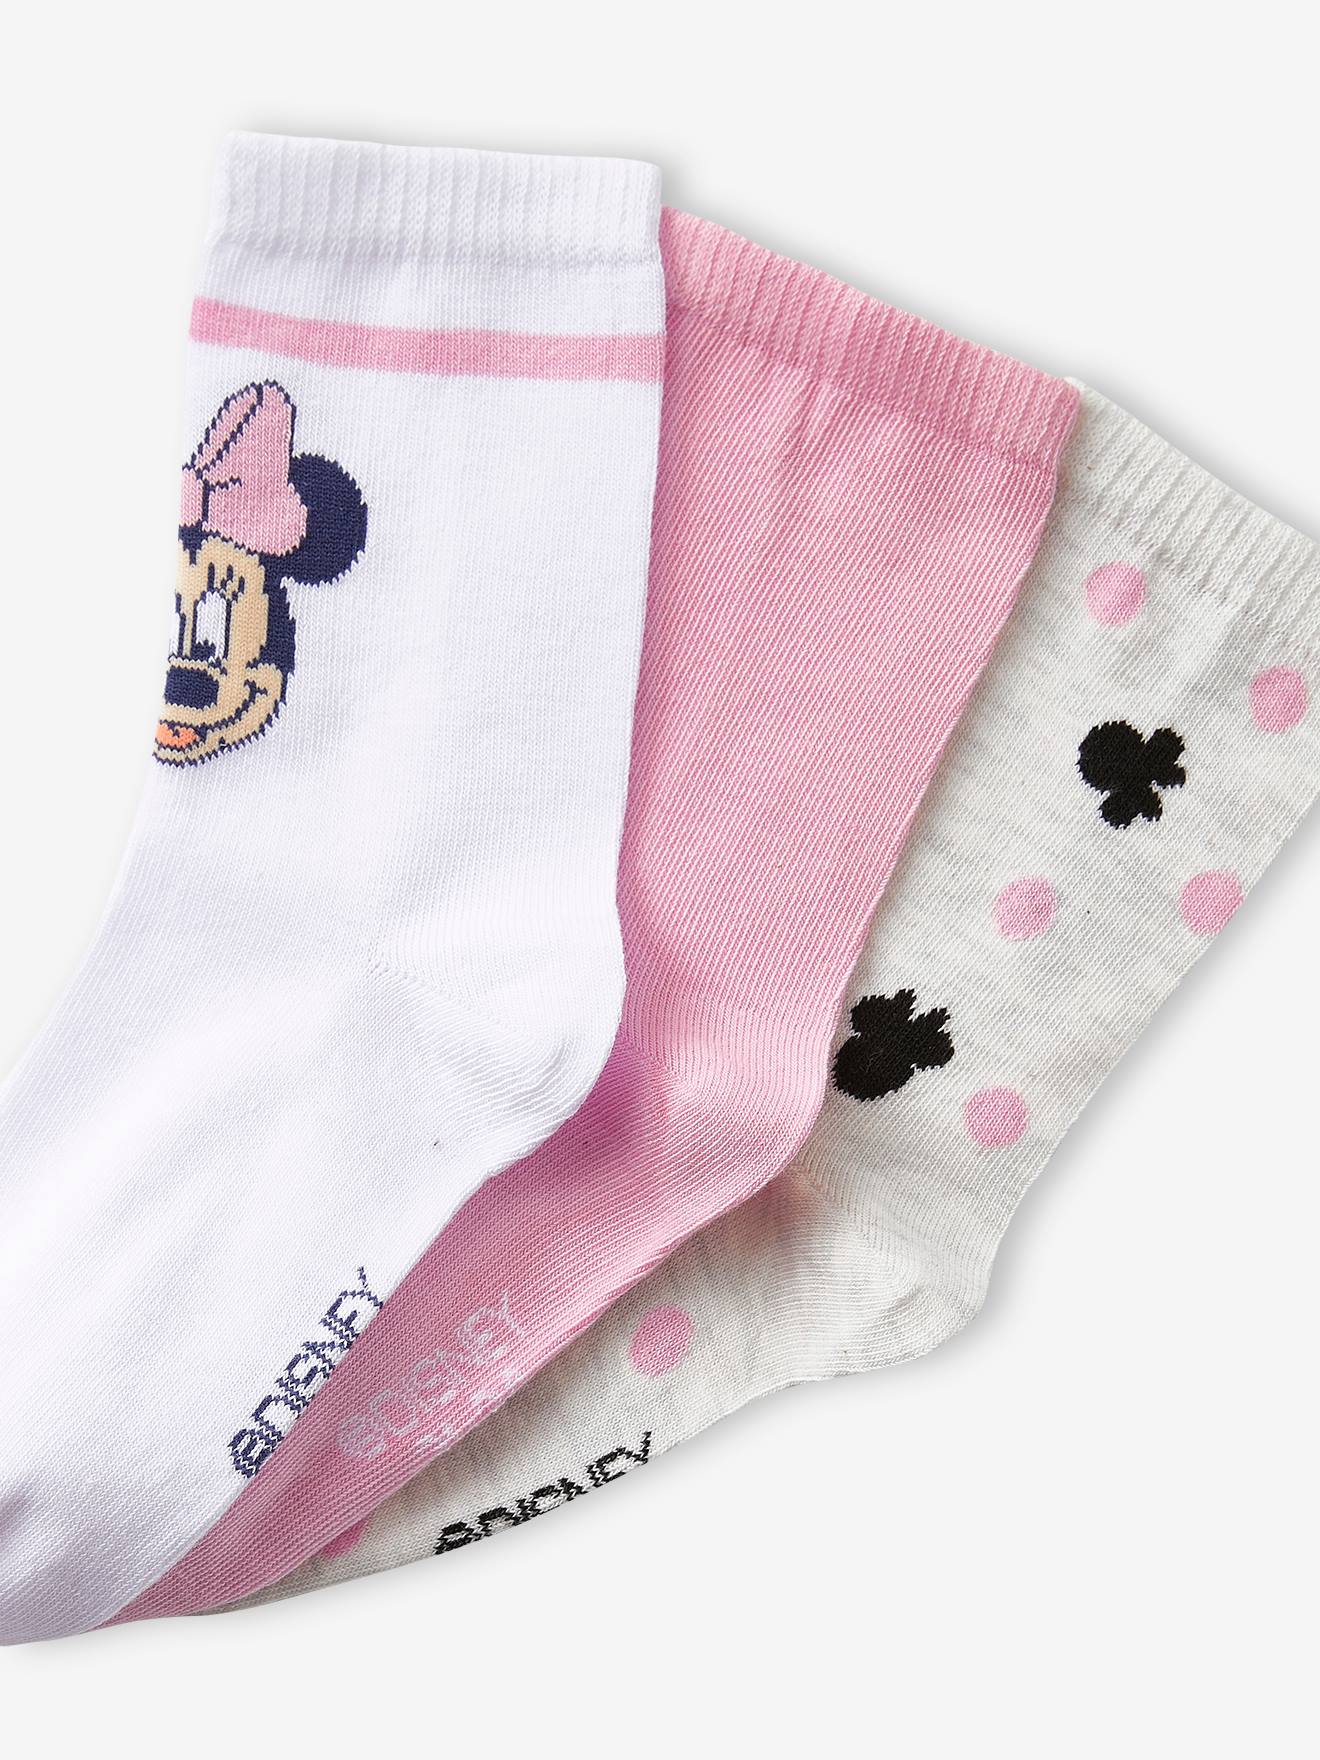 Pack of 3 Pairs of Minnie Mouse Socks by Disney Pink Medium Solid